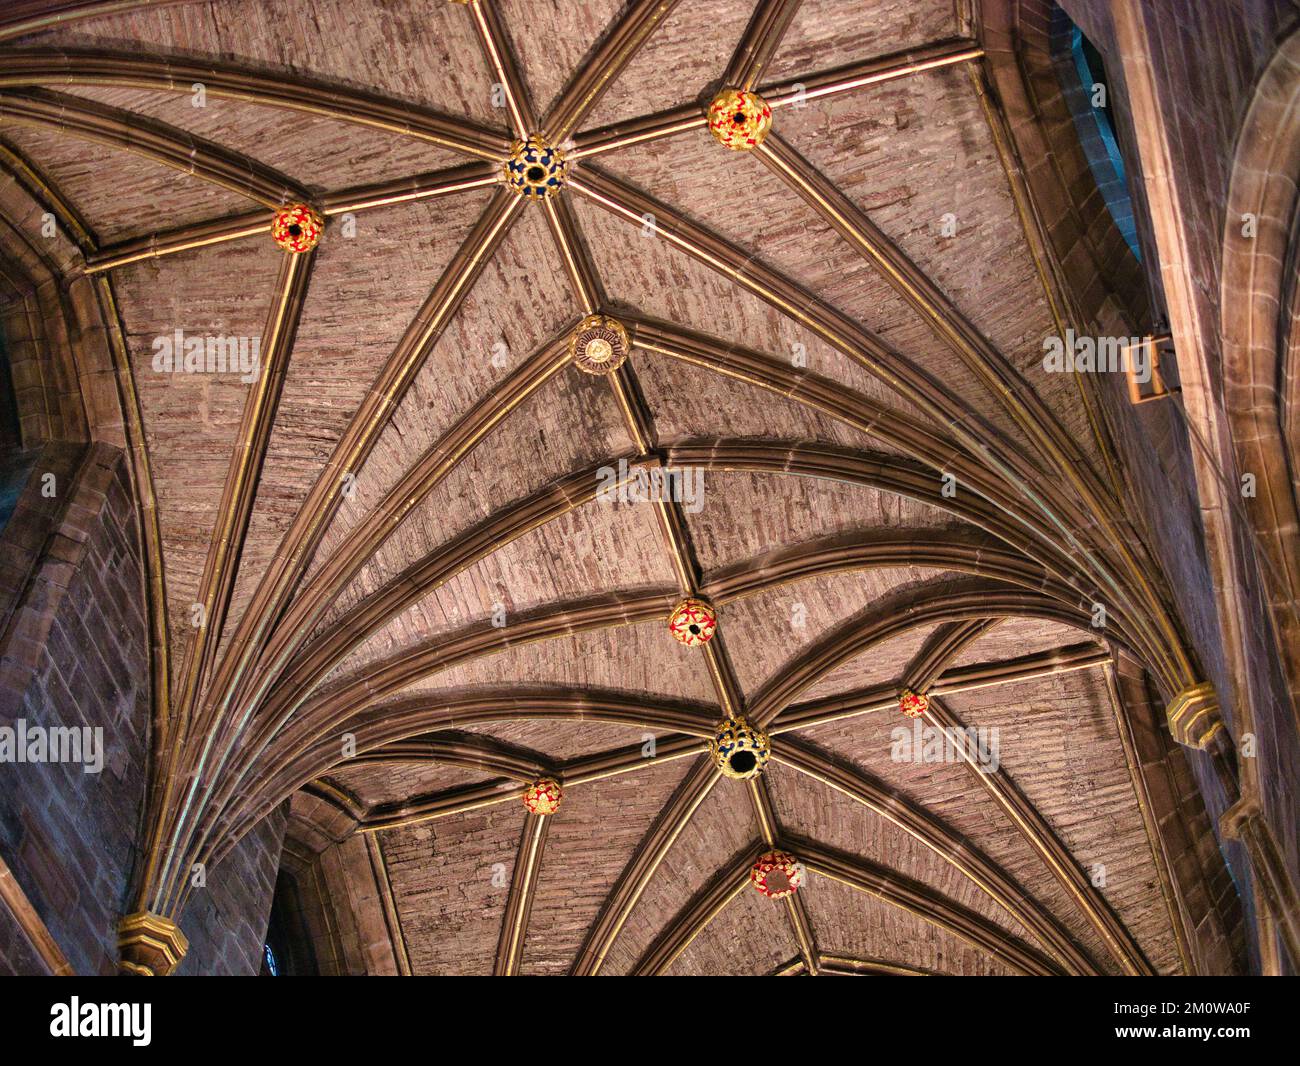 Stone vaulting in the Thistle Chapel in St Giles' Cathedral in Edinburgh Old Town, Scotland, UK Stock Photo